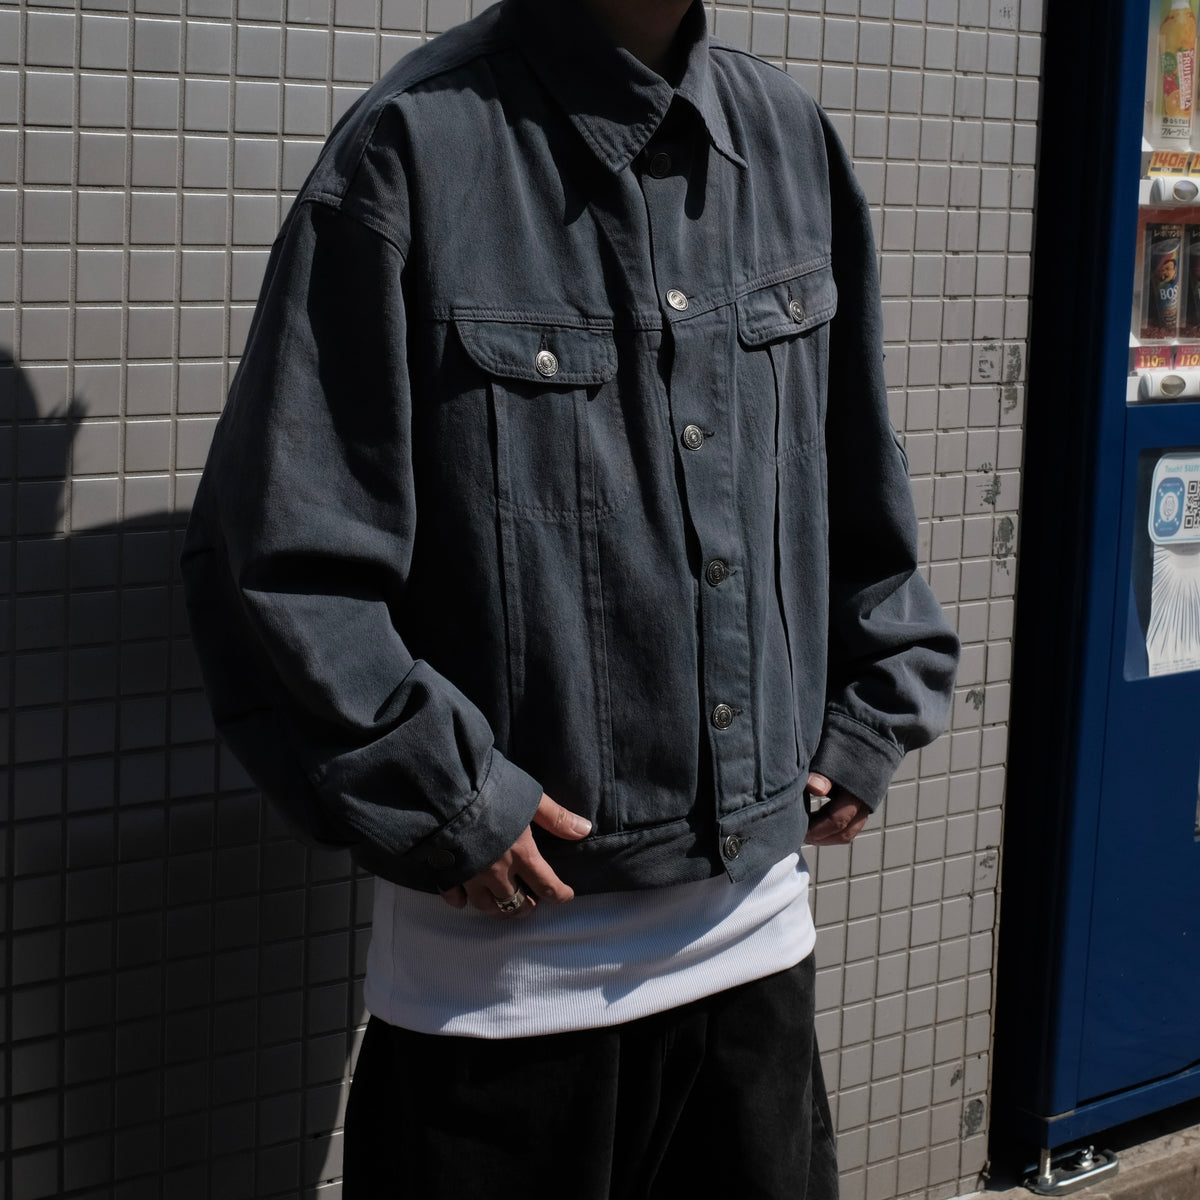 【RESTOCK】 WILLY CHAVARRIA / CHACHI TRUCKER CIGARETTE POCKET JACKET CHEMICAL WASH BLACK